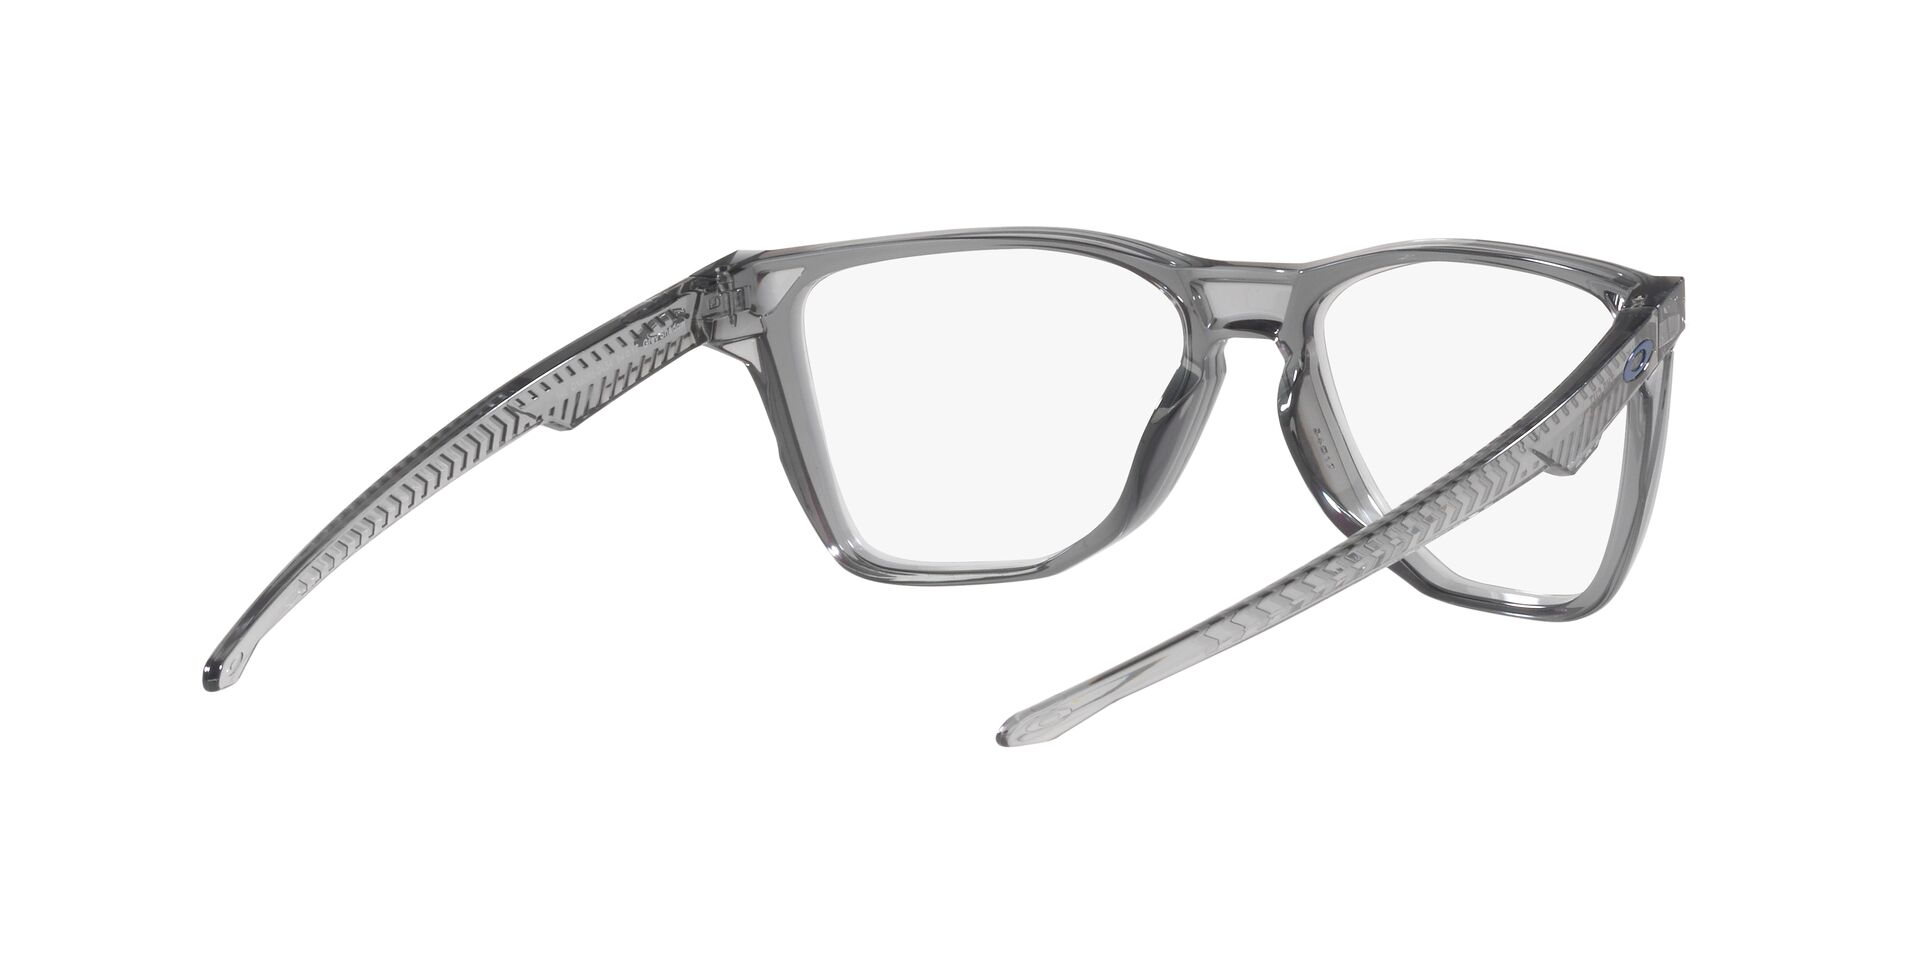 OAKLEY-THE-CUT-8058 805804 GREY SHADOW 56*17, , hi-res image number 5